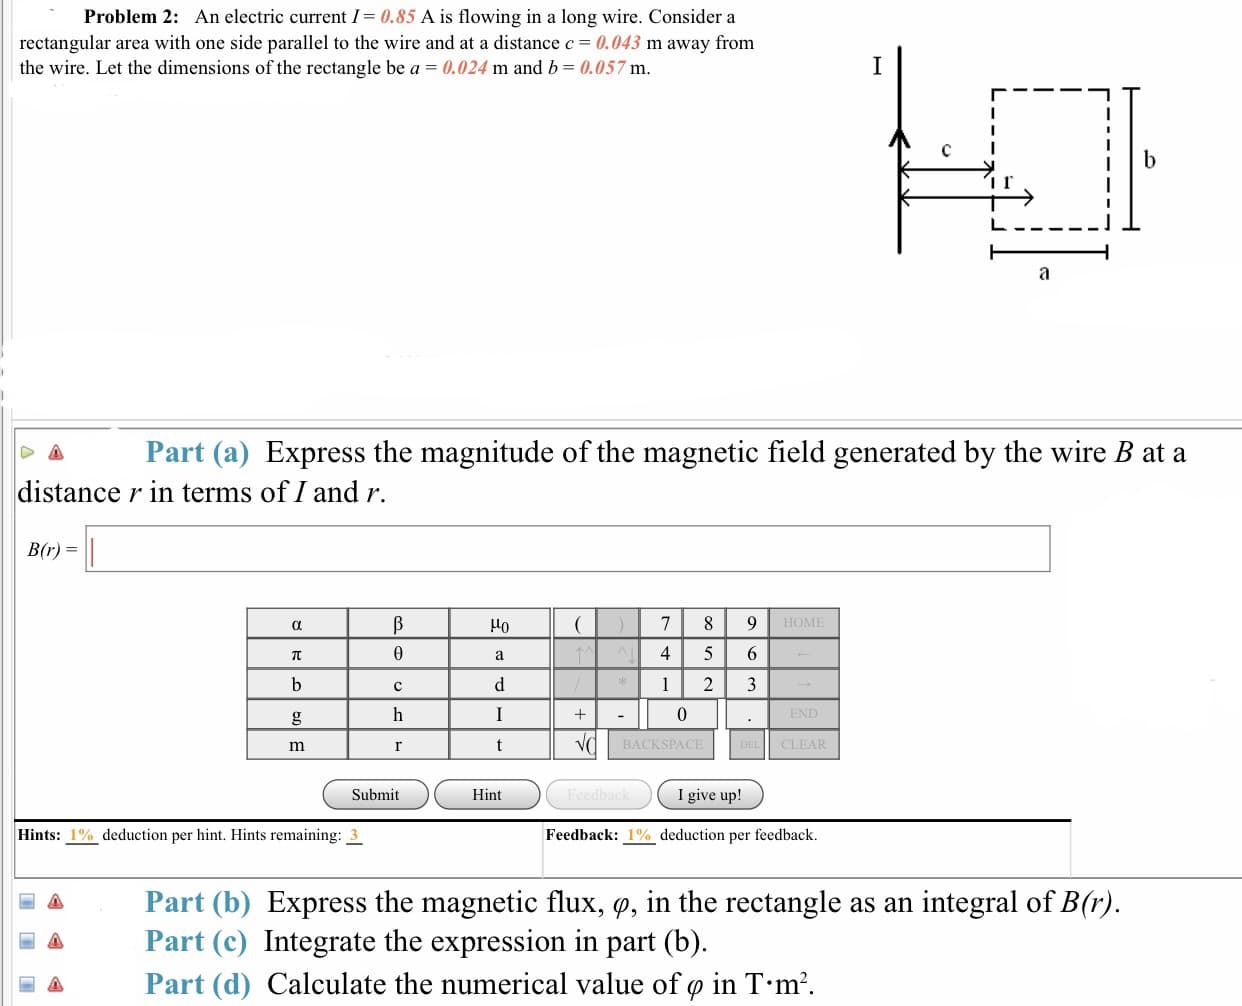 Problem 2: An electric current I0.85 A is flowing in a long wire. Consider a
rectangular area with one side parallel to the wire and at a distance 0.043 m away from
the wire. Let the dimensions of the rectangle be a 0.024 m and b-0.057 m
Part (a) Express the magnitude of the magnetic field generated by the wire B at a
distance r in terms of I and r.
B(r)
Но
4 5 6
BACKSPAC
CLEAR
Submit
Hint
I give up!
Hints: 1% deduction per hint. Hints remaining: 3
Feedback: 1% deduction per feedback.
Part (b) Express the magnetic flux, ф, in the rectangle as an integral of B(r)
A Part (c) Integrate the expression in part (b)
圖 Part (d) Calculate the numerical value of φ in T-m2.
